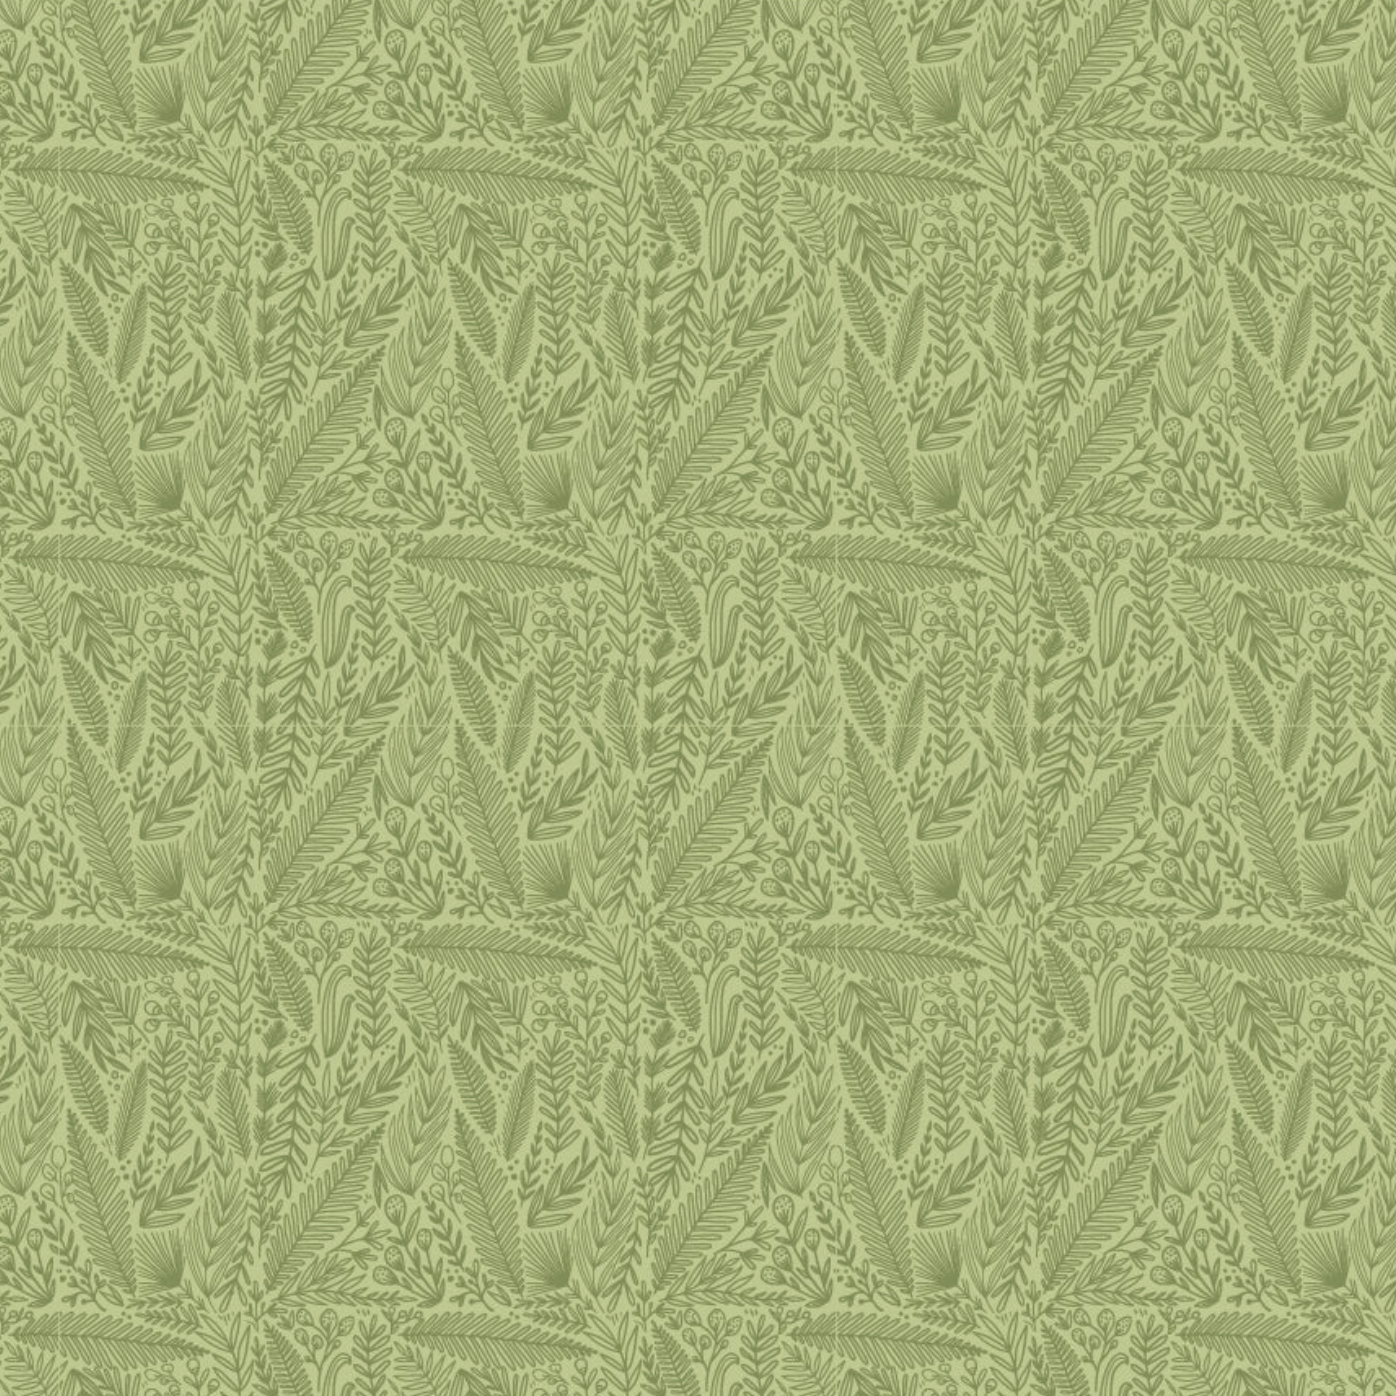 Cottage Charm, Delicate Foliage Green, CH24757, sold by the 1/2 yard, *PREORDER